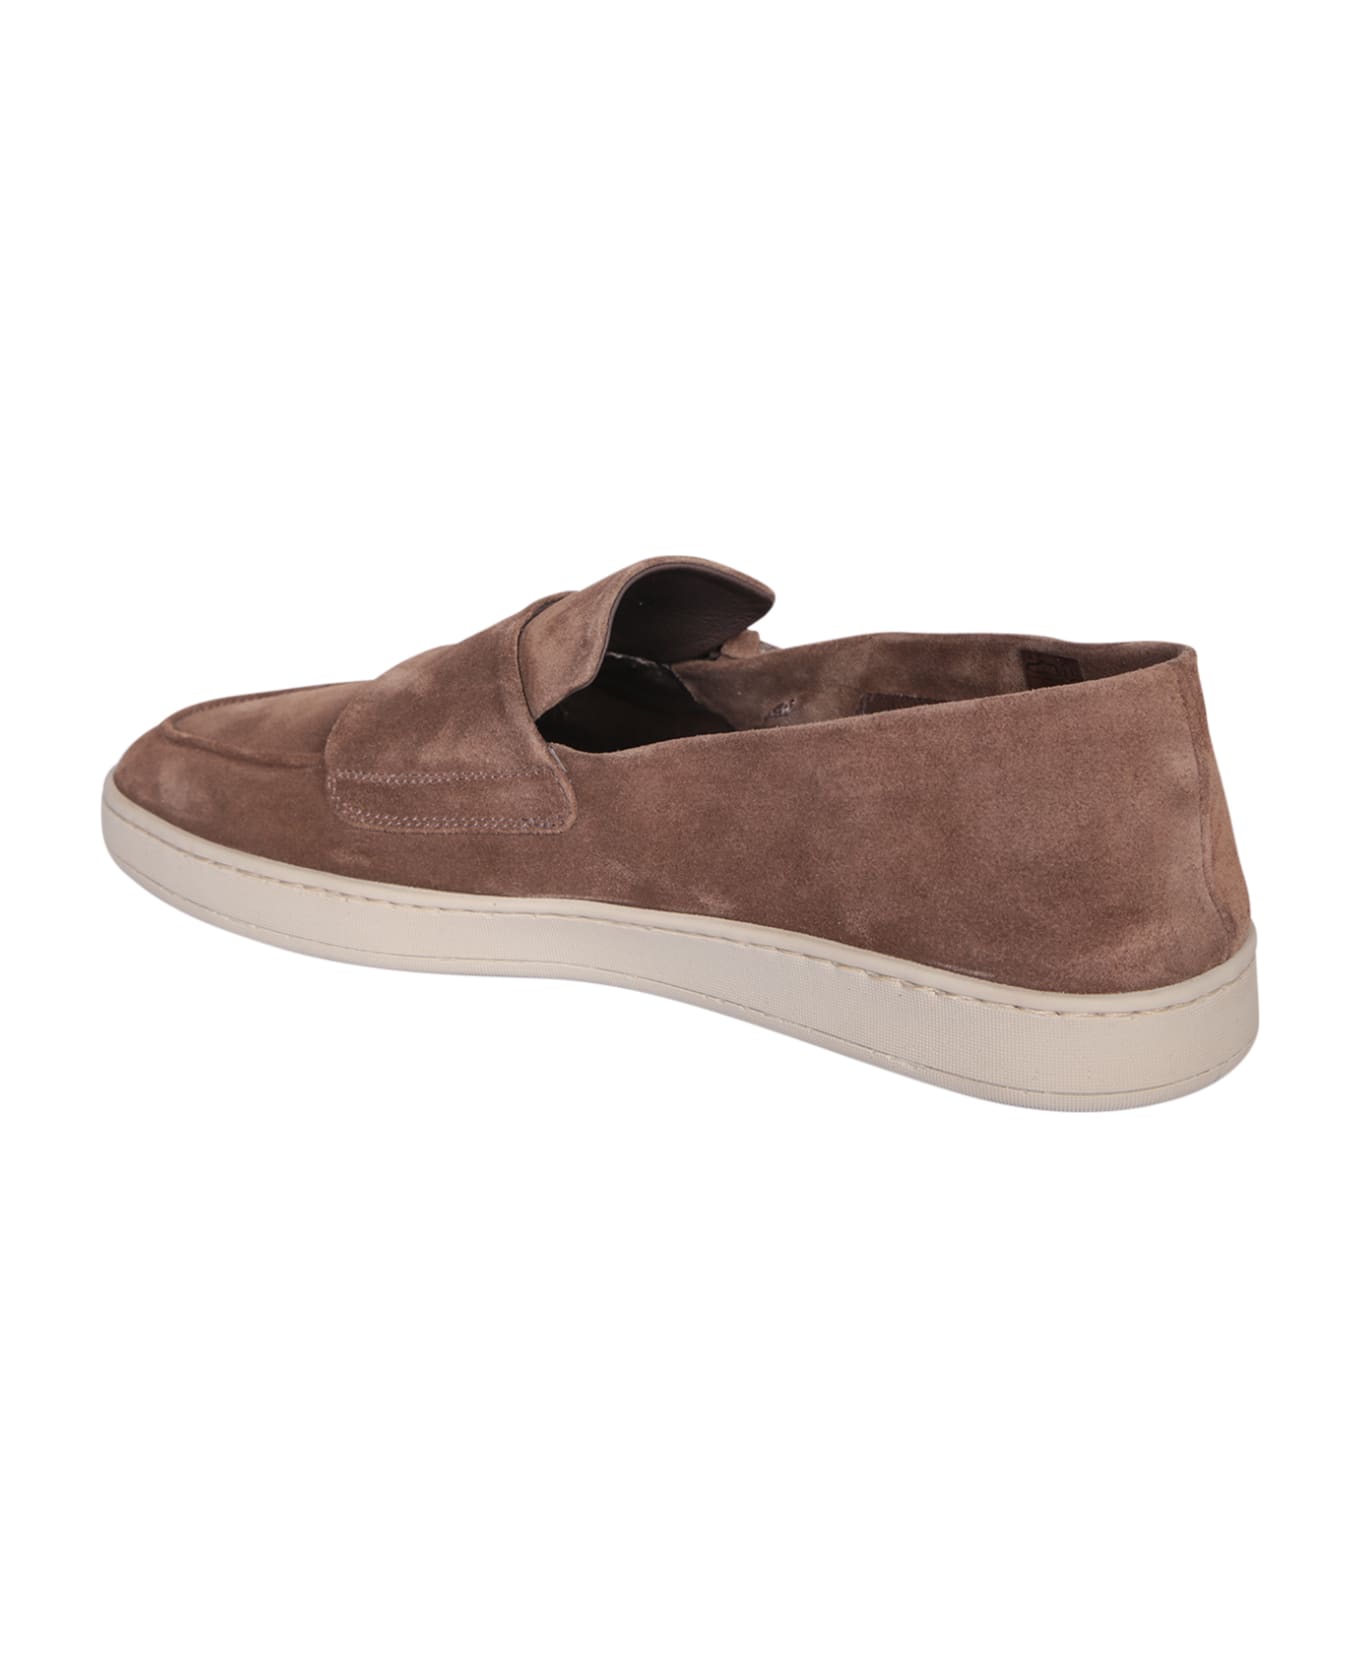 Officine Creative Herbie 005 Suede Taupe Loafer - Brown ローファー＆デッキシューズ